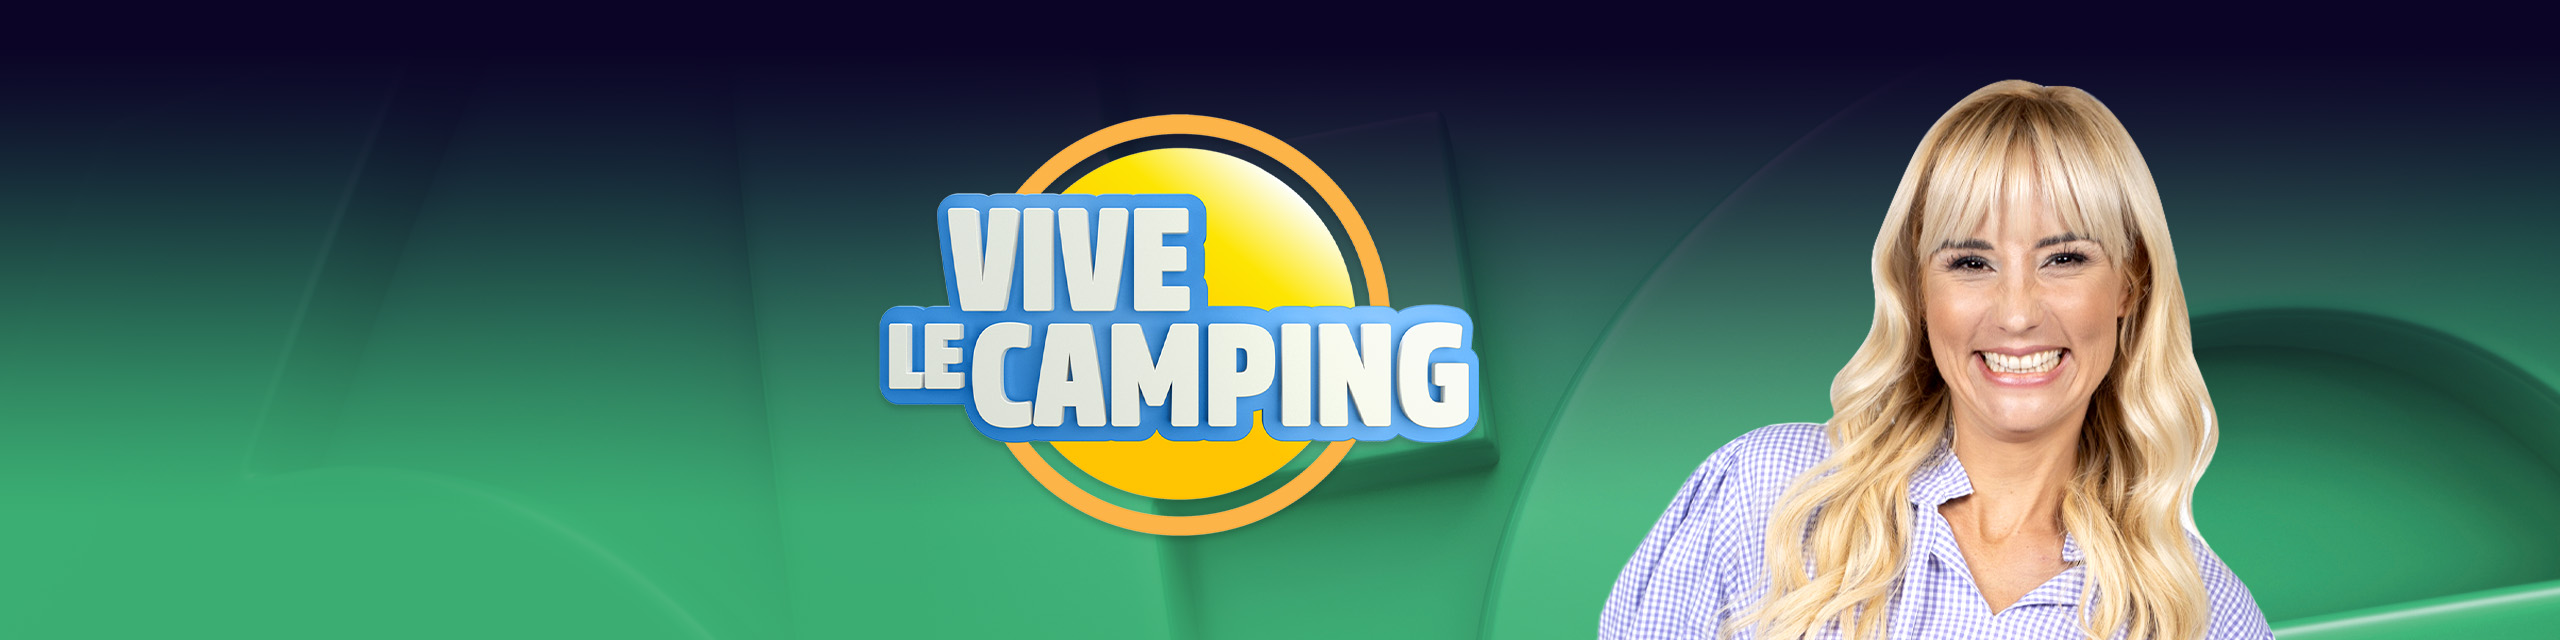 vive-le-camping